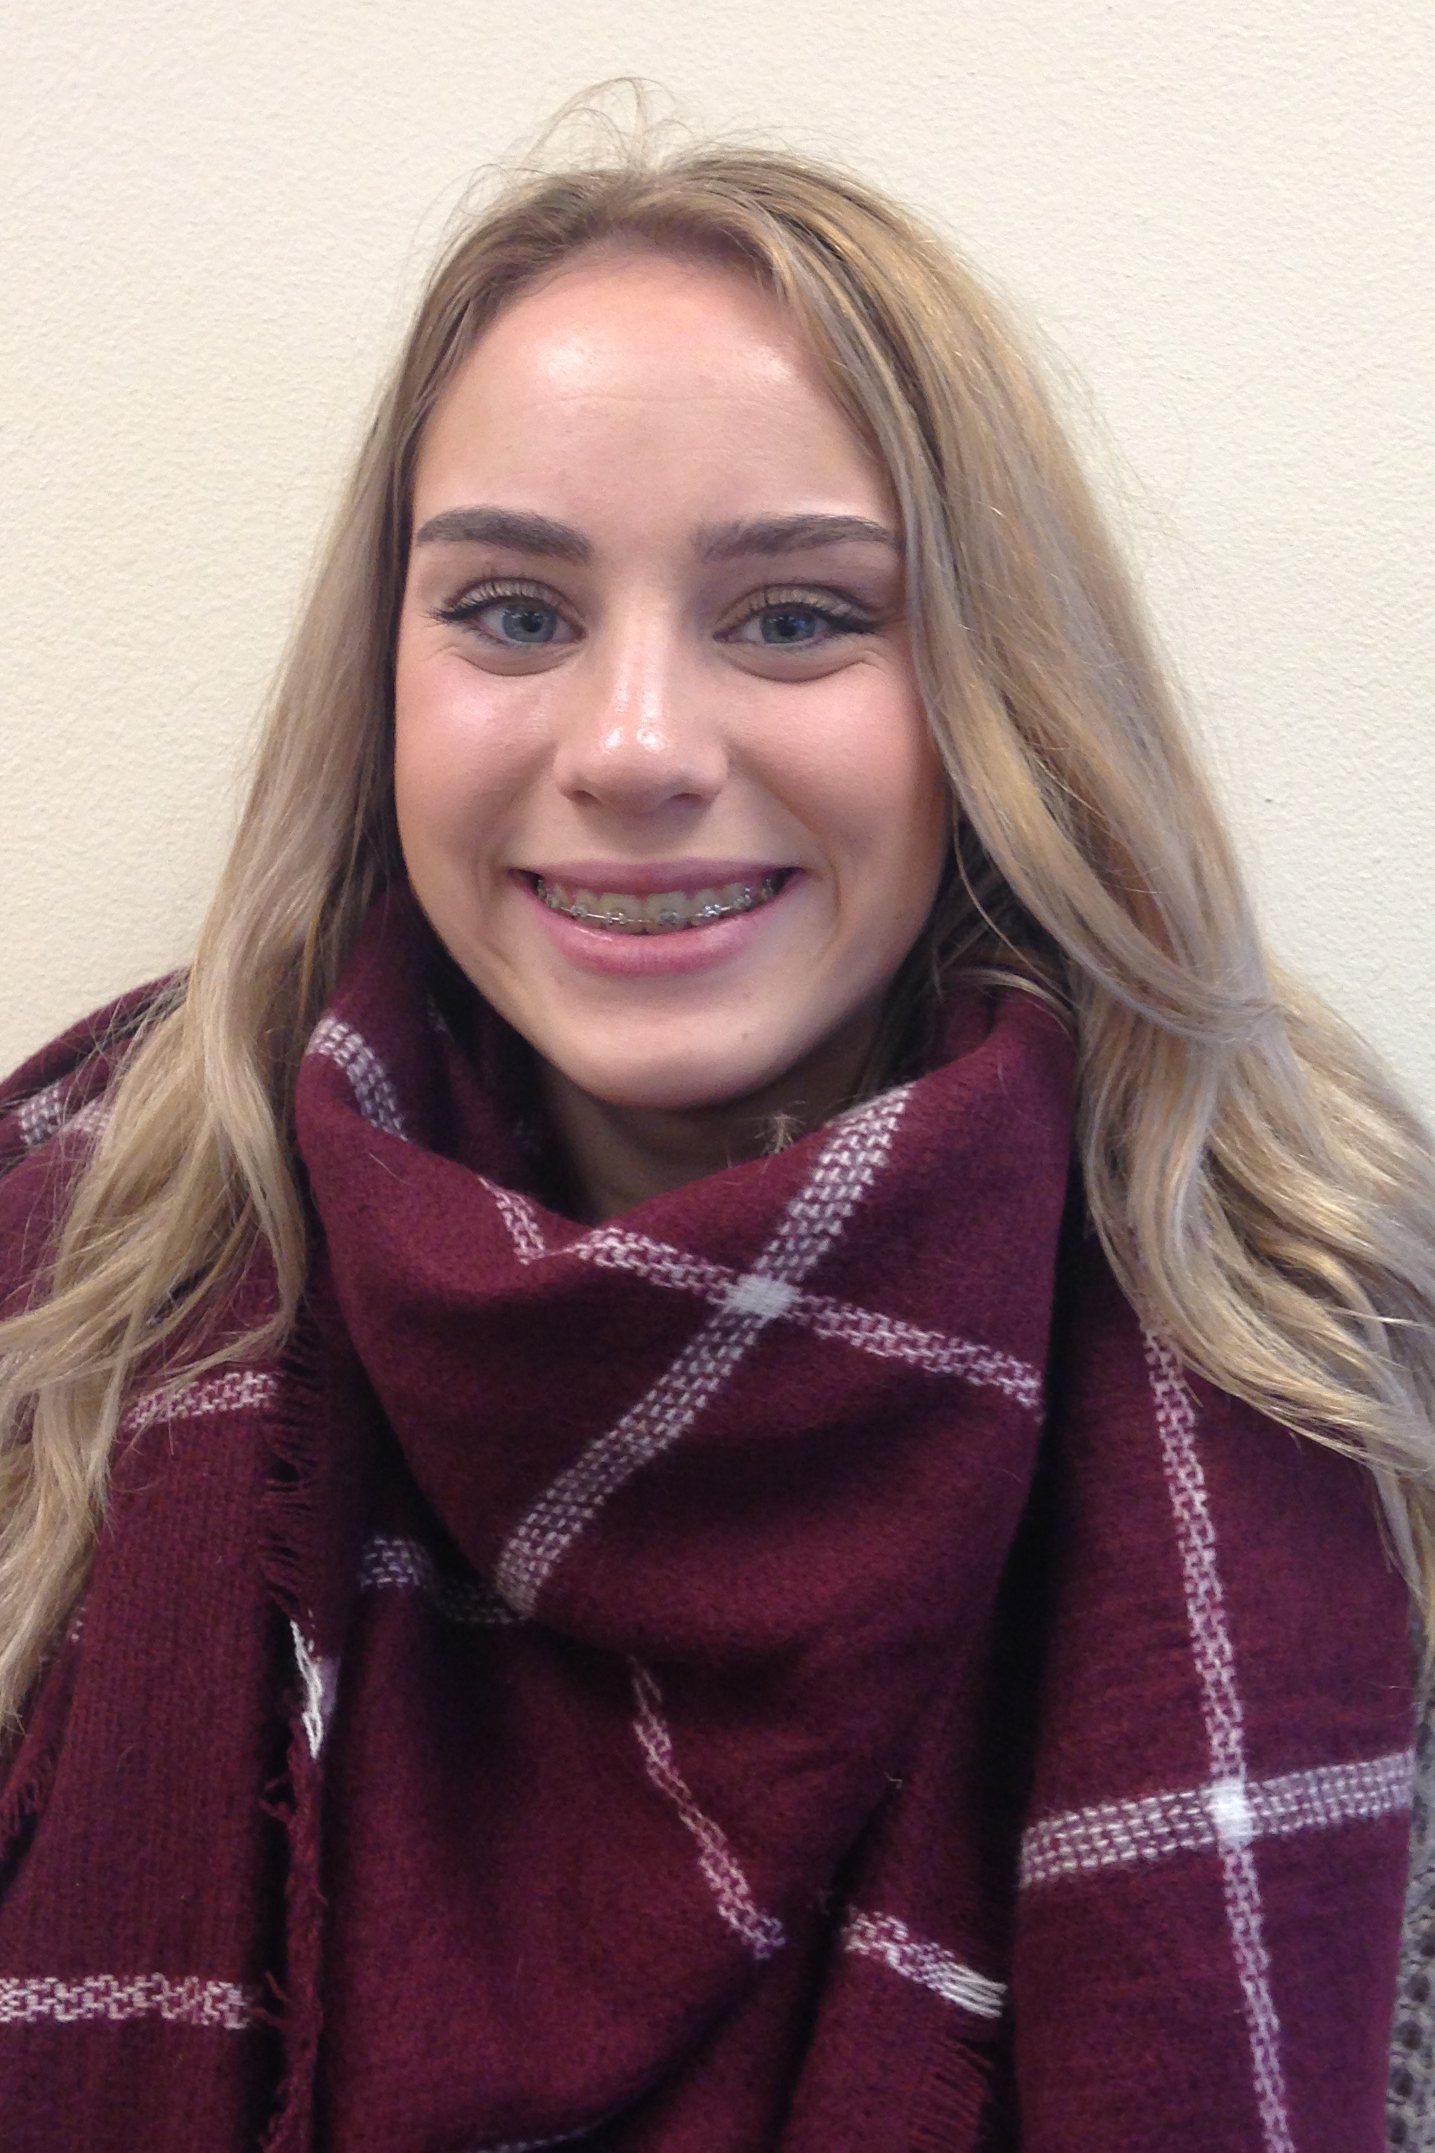 Athlete of the Week: Shayla Floch